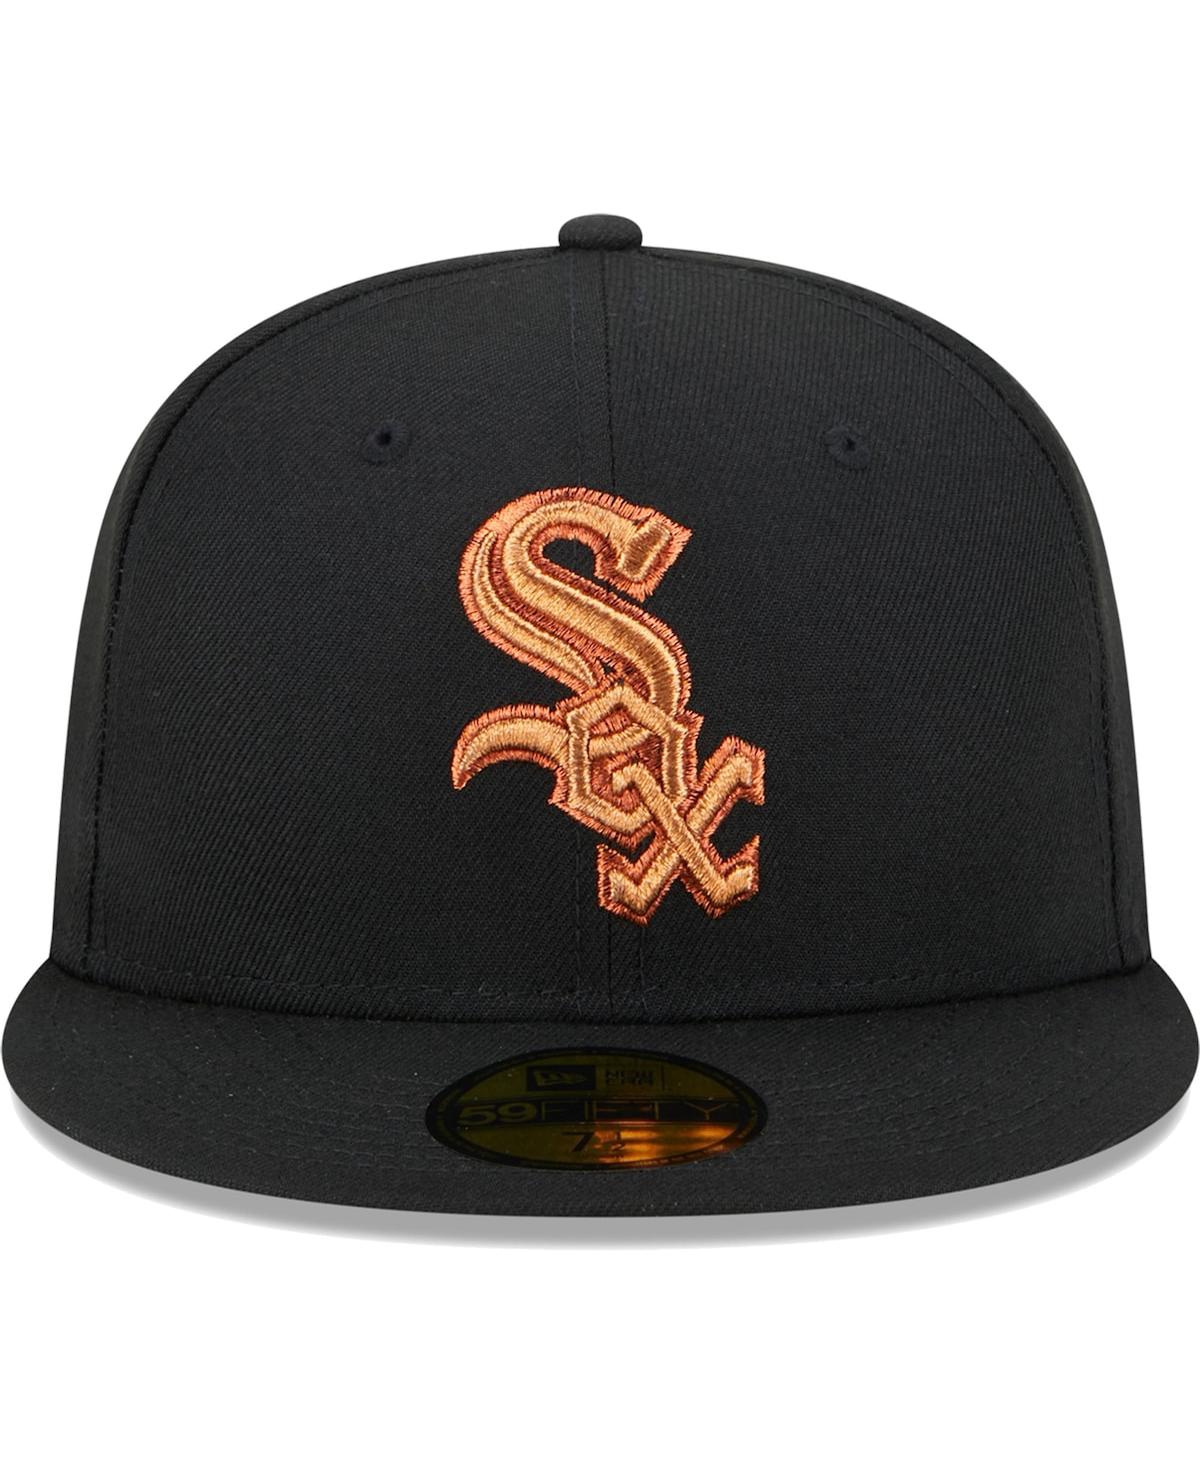 Shop New Era Men's  Black Chicago White Sox Metallic Pop 59fifty Fitted Hat